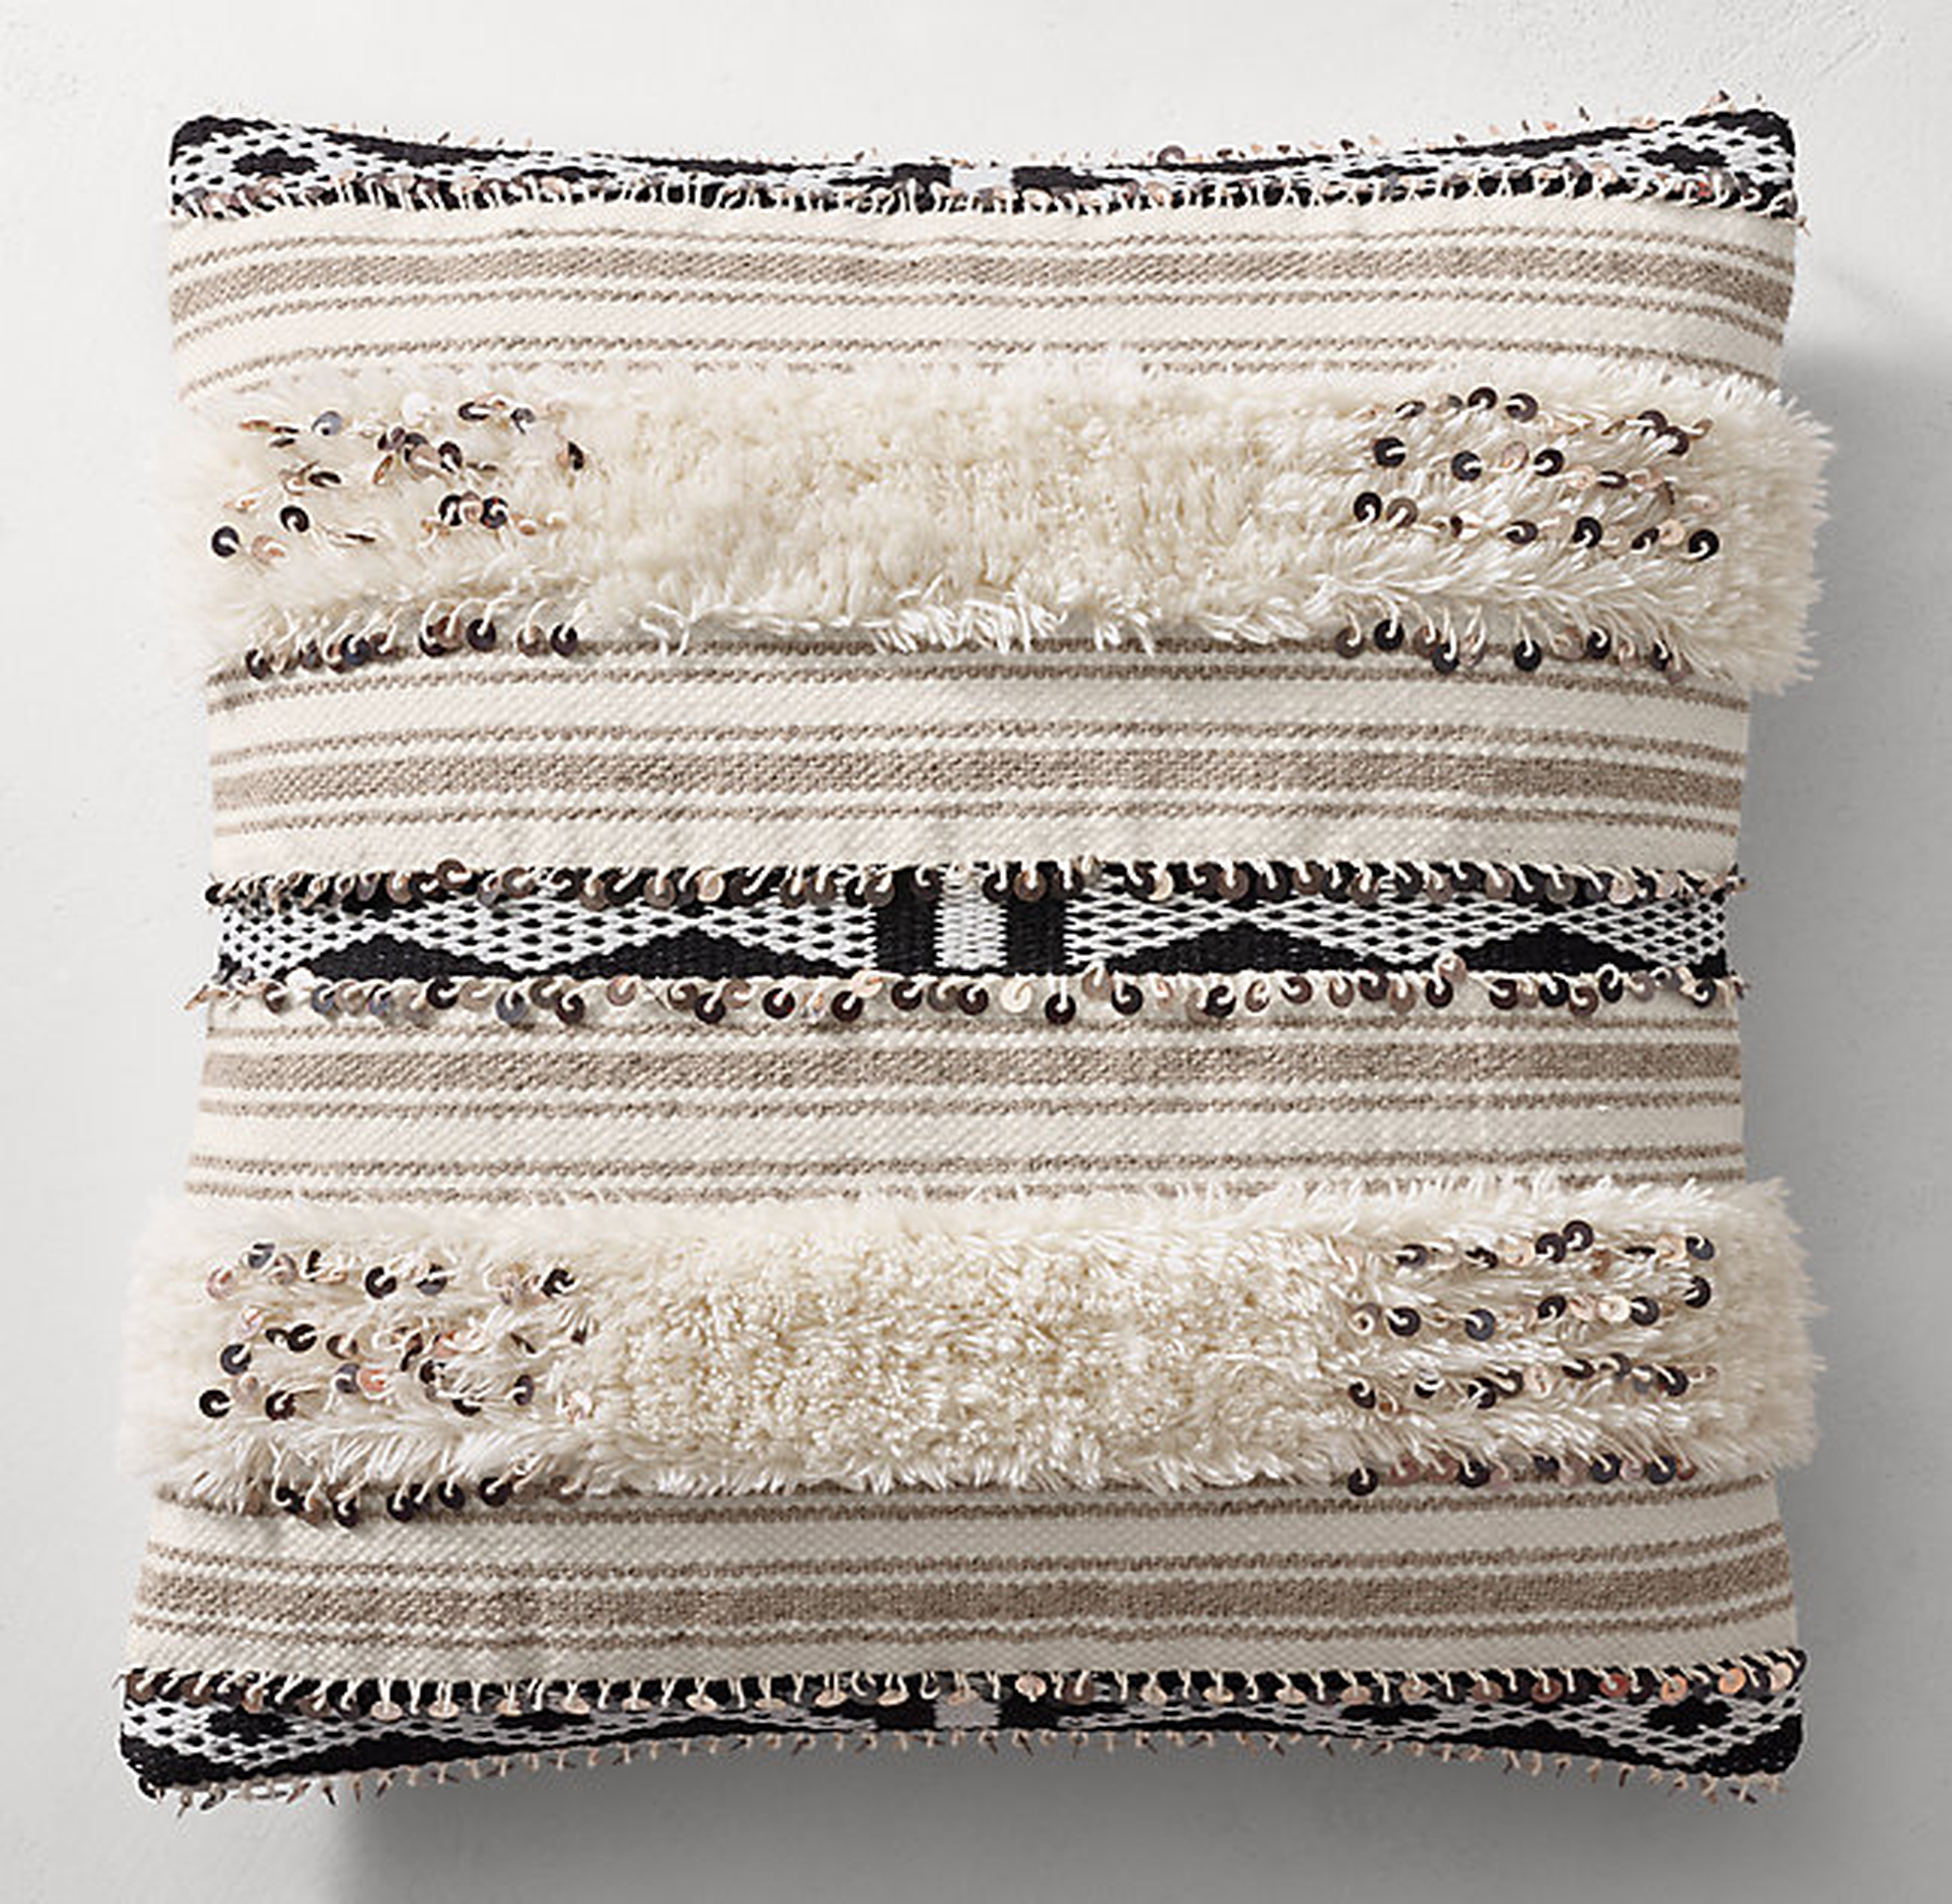 MOROCCAN WEDDING BANDED PILLOW COVER - 22x22 - Natural - RH